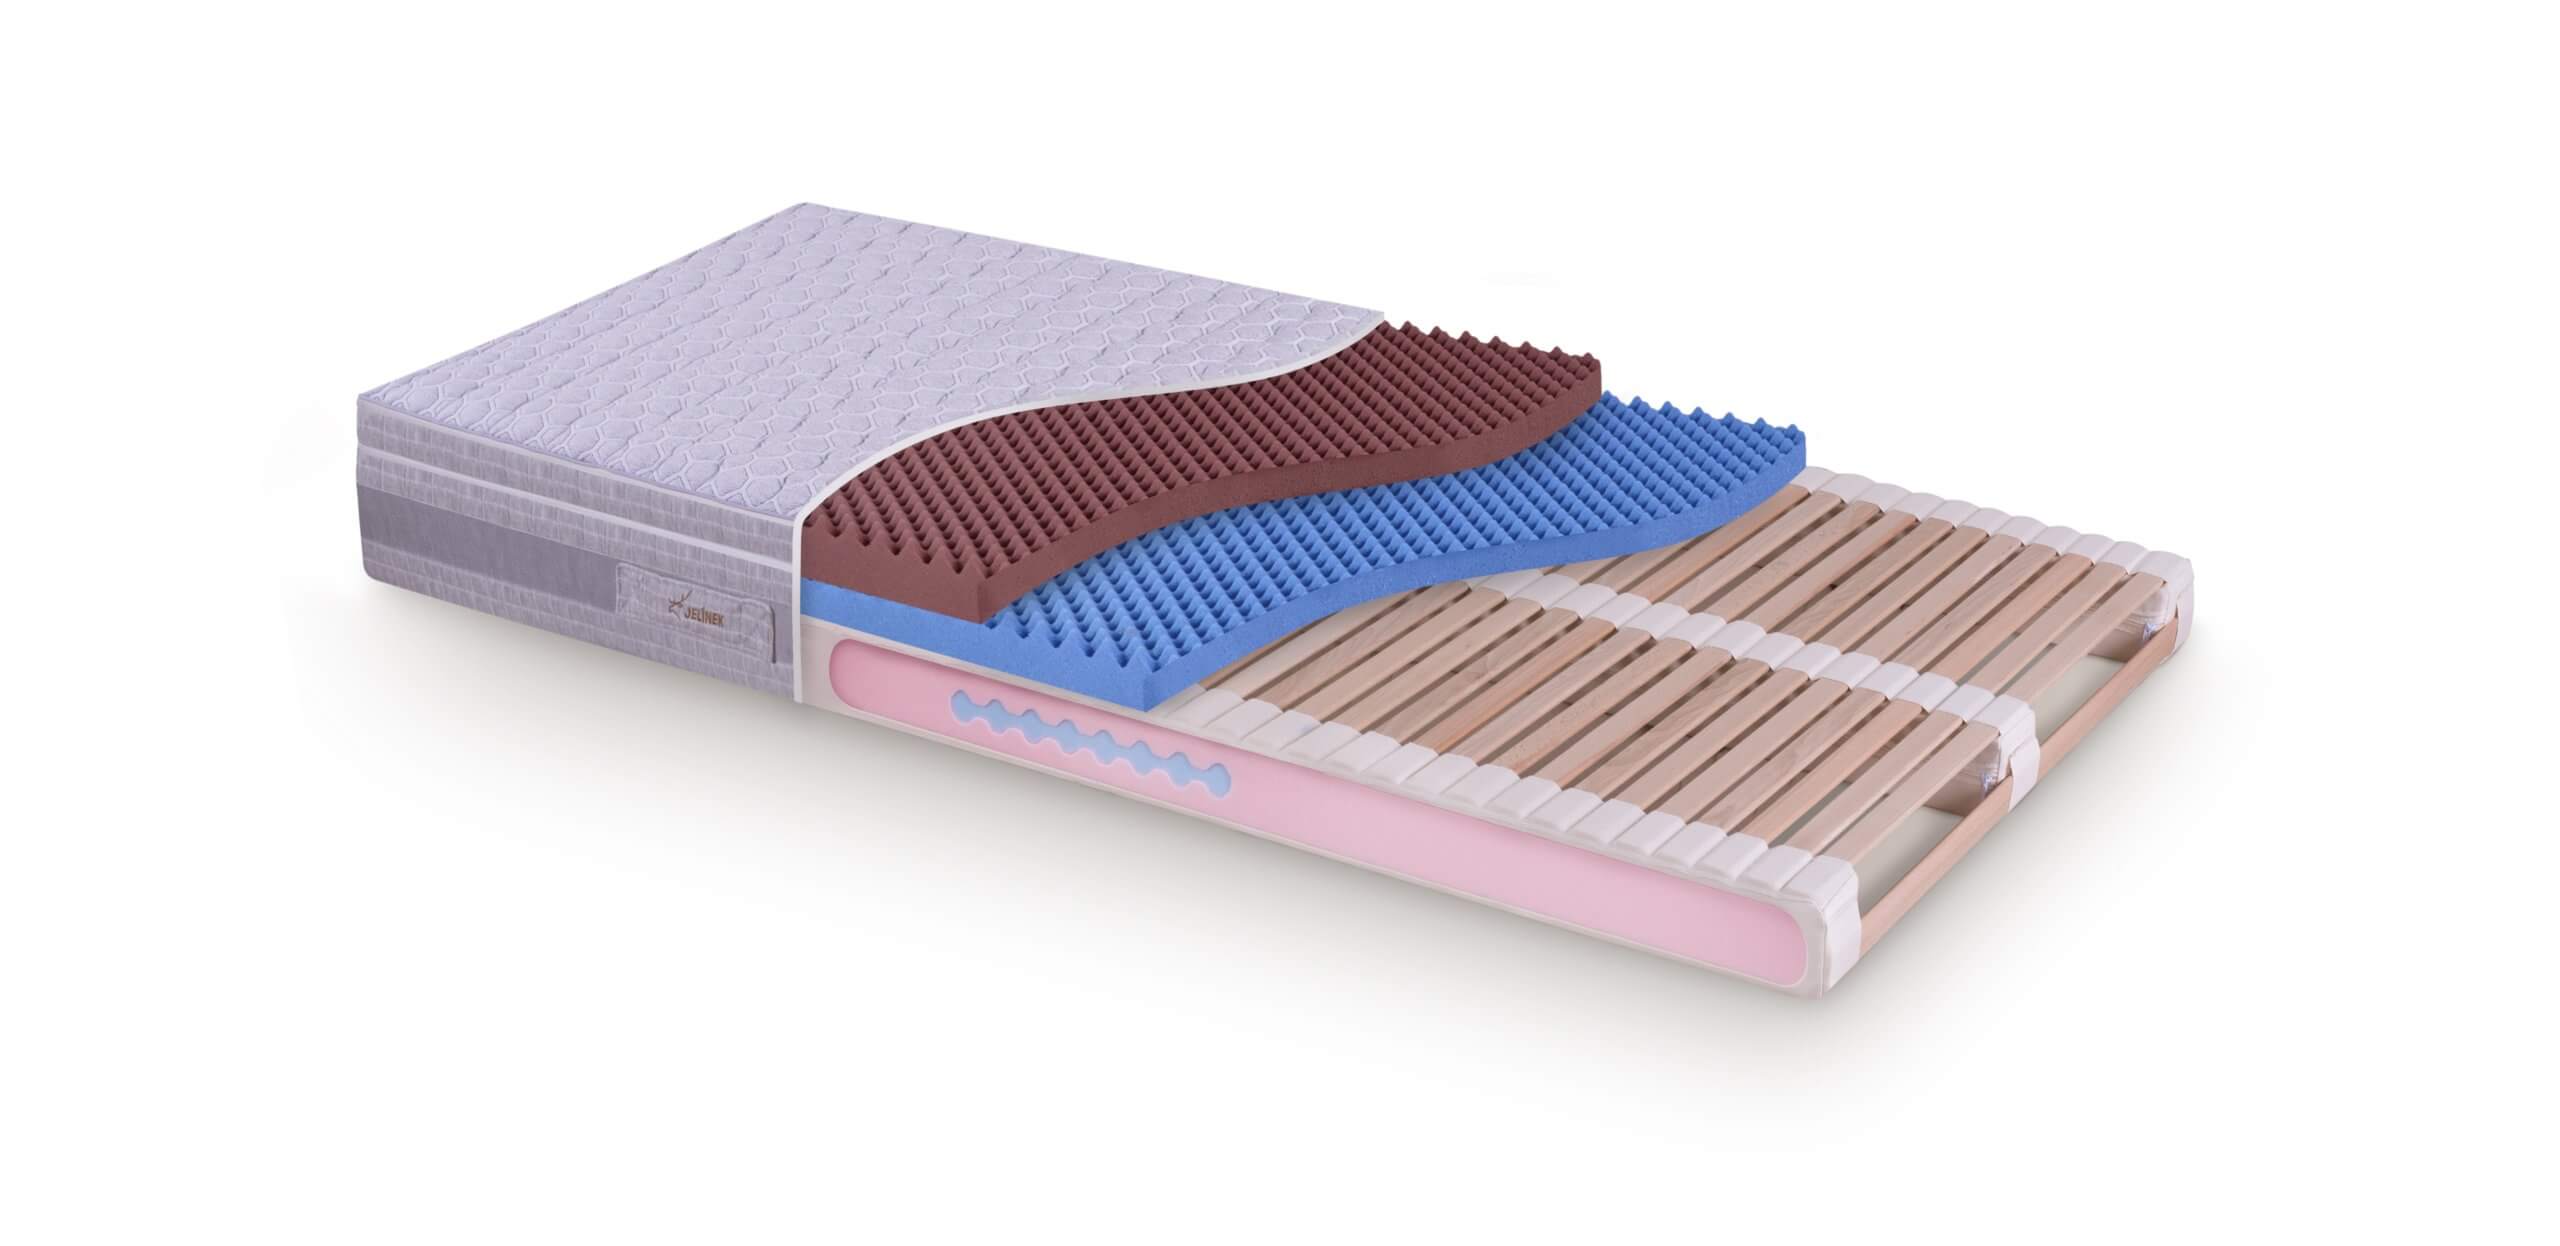 Properties of distribution layers for mattresses